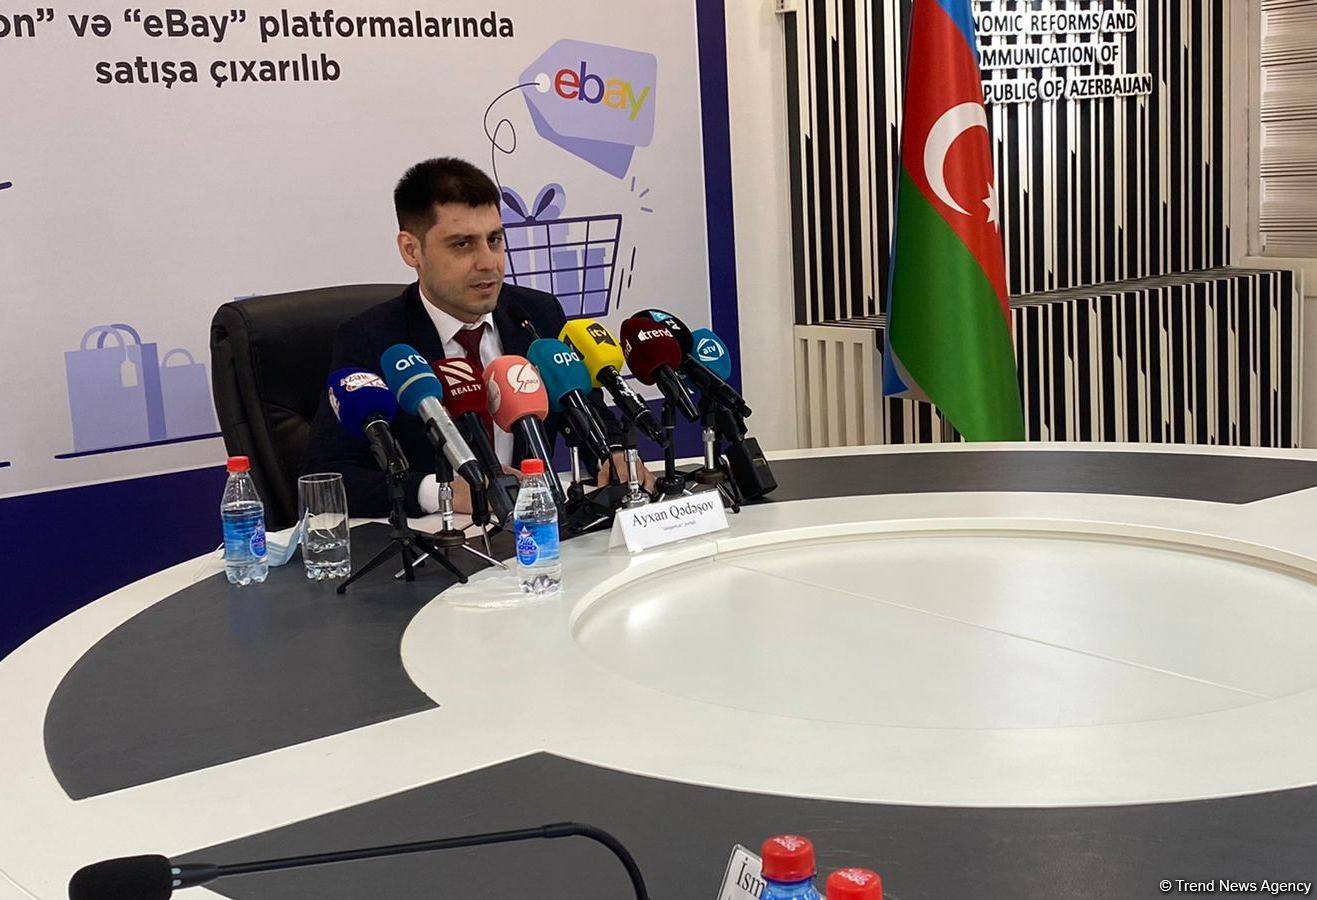 Trade turnover on e-commerce platforms up in Azerbaijan